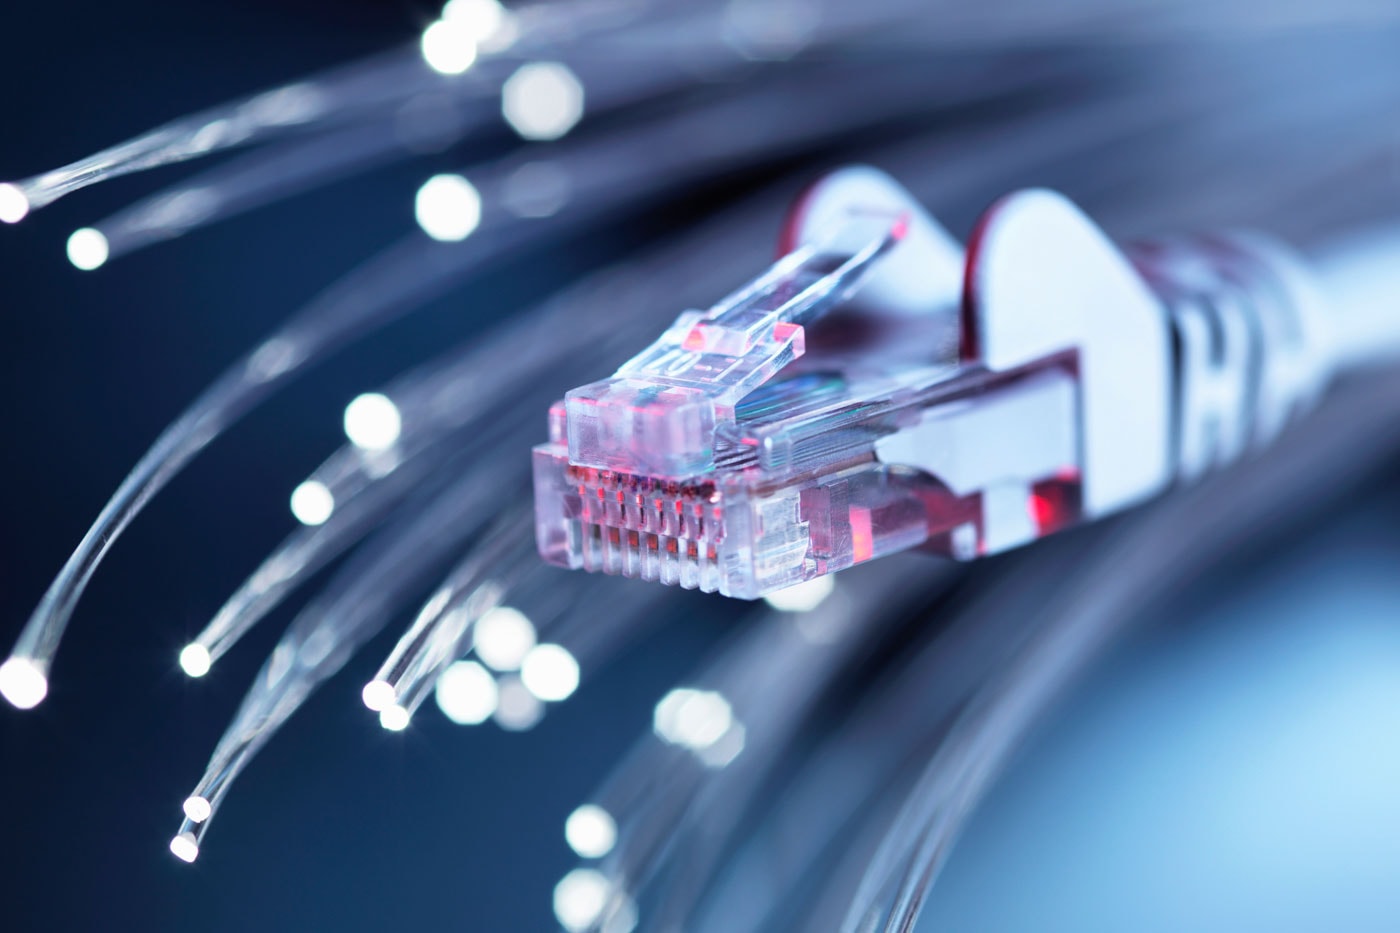 Twisted Fiber Optic Cable Internet Technology 100 Times Faster